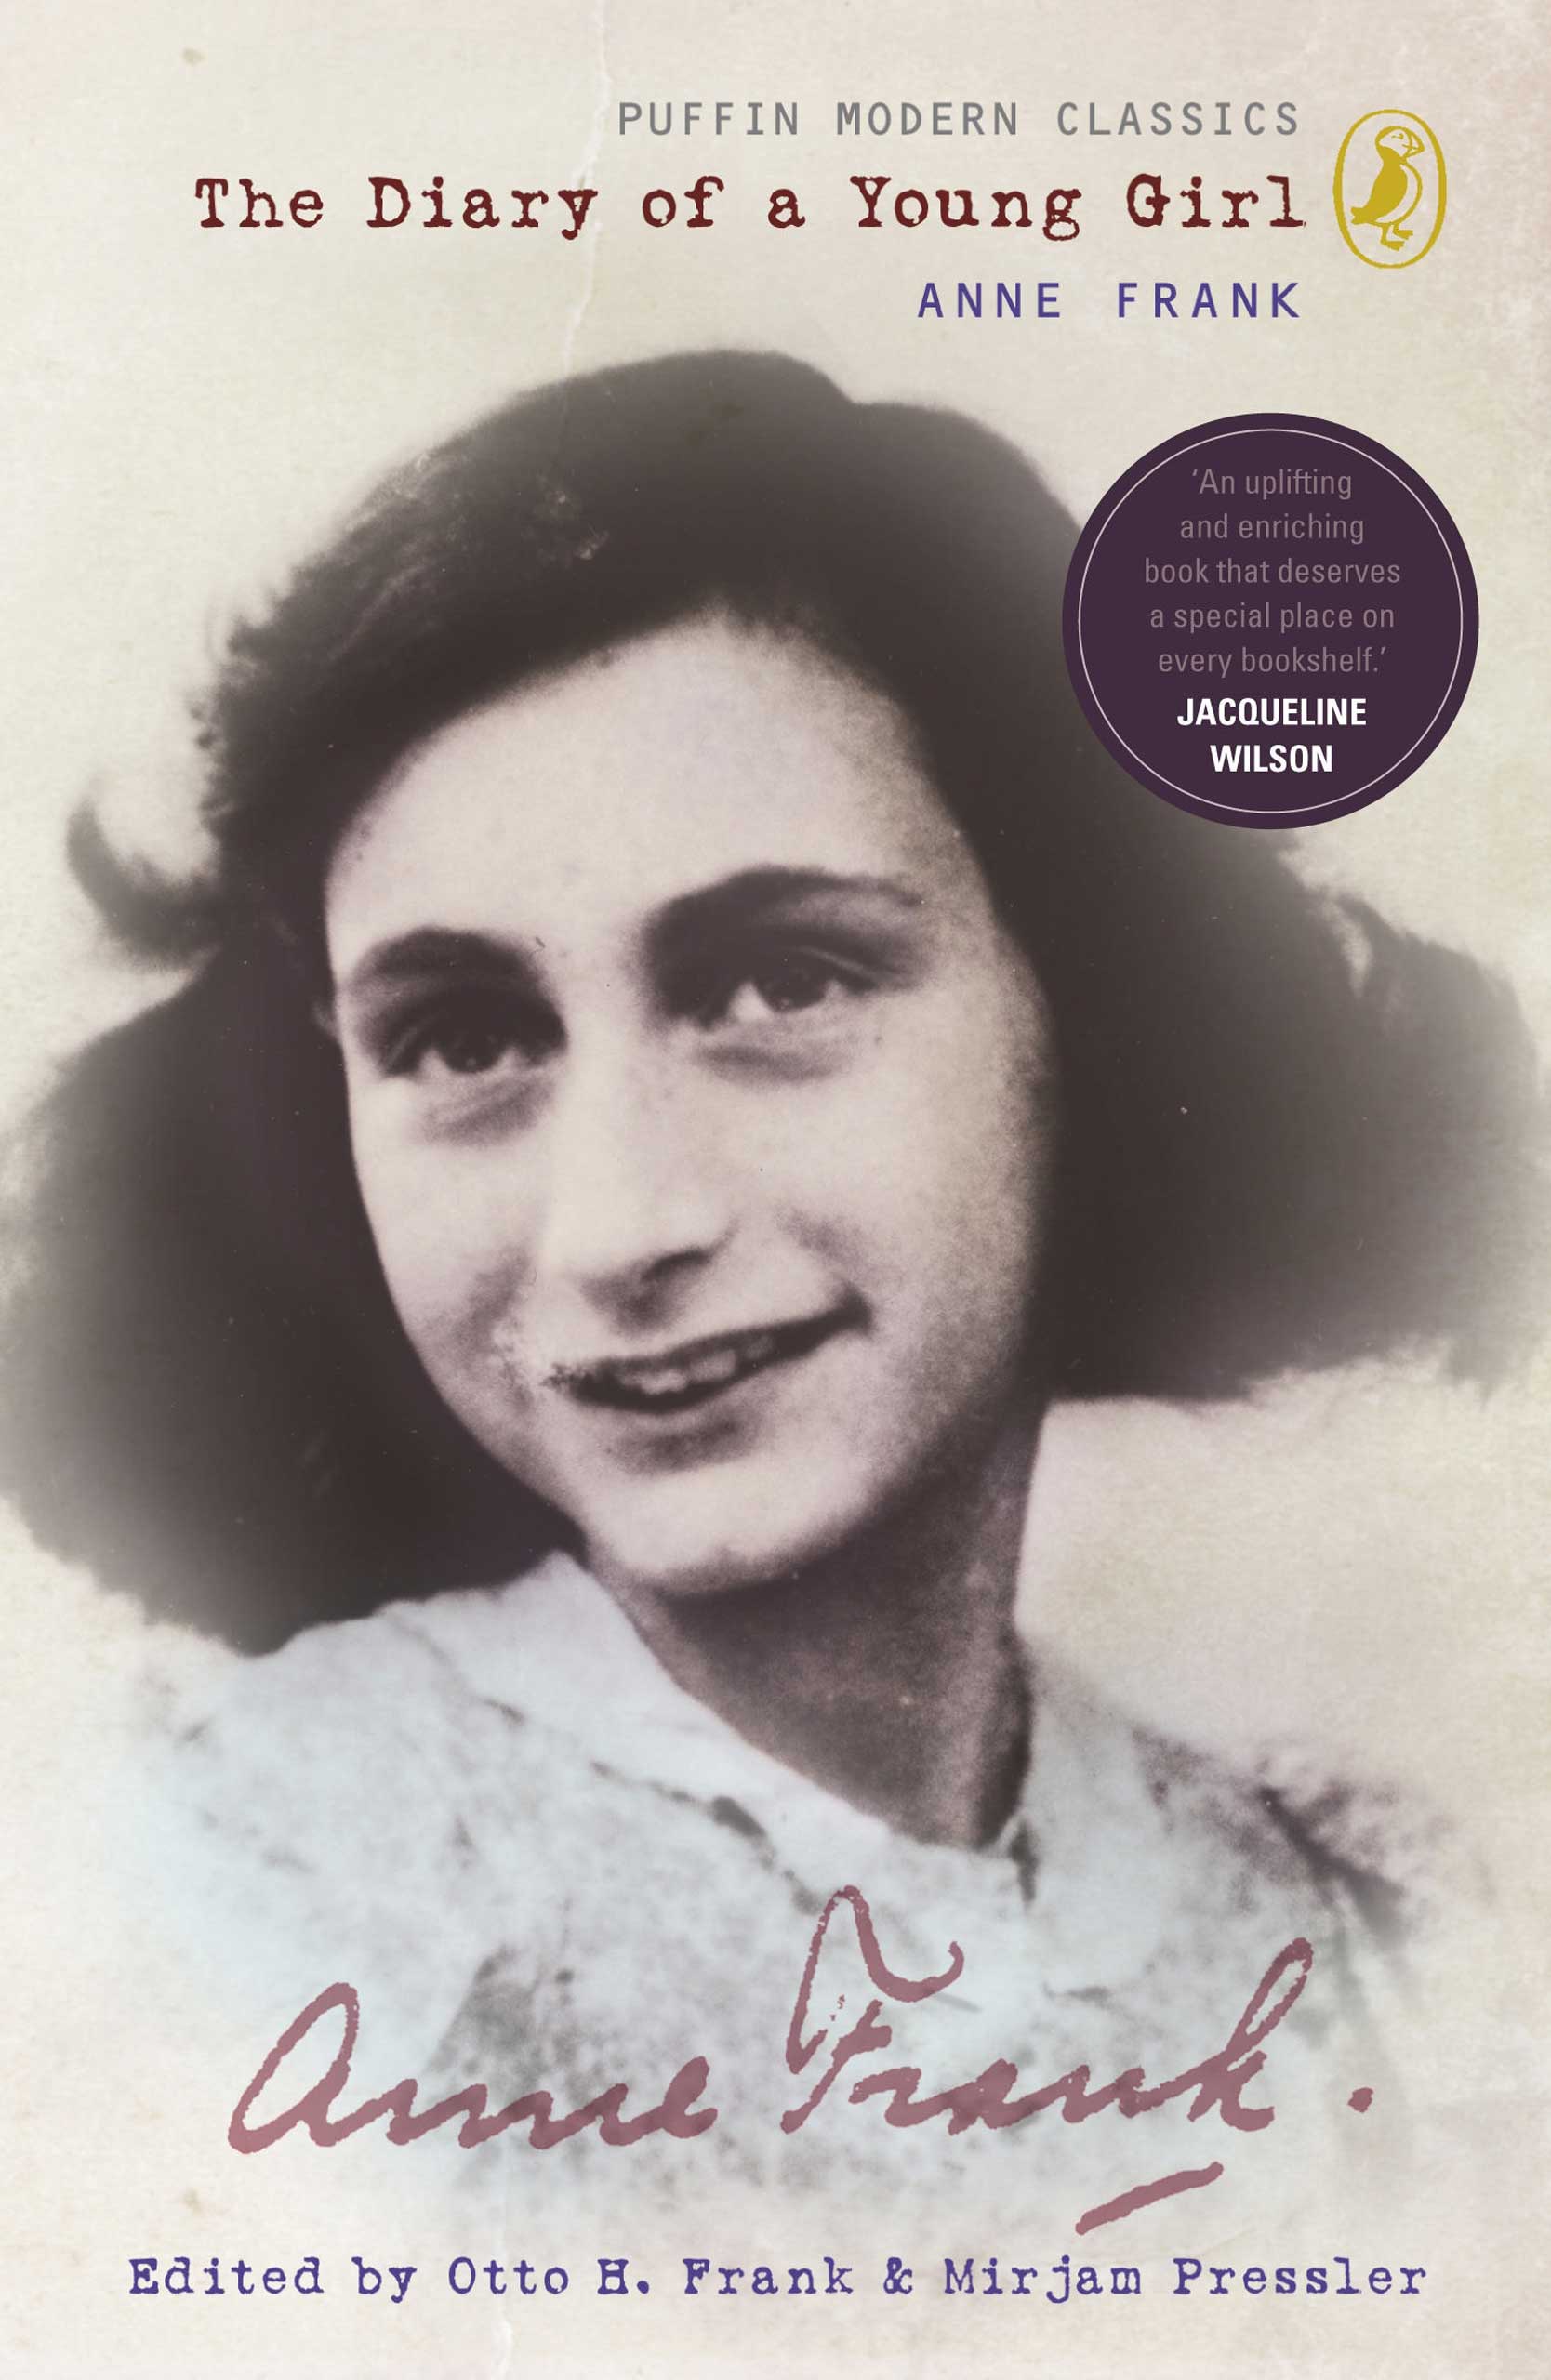 The Diary of a Young Girl, by Anne Frank. 
                              
                              
                              
                              Frank's innocuous and relatable musings while hiding under Nazi occupation capture the tragedy of the Nazi regime.
                              
                              
                              
                              Buy now: The Diary of a Young Girl